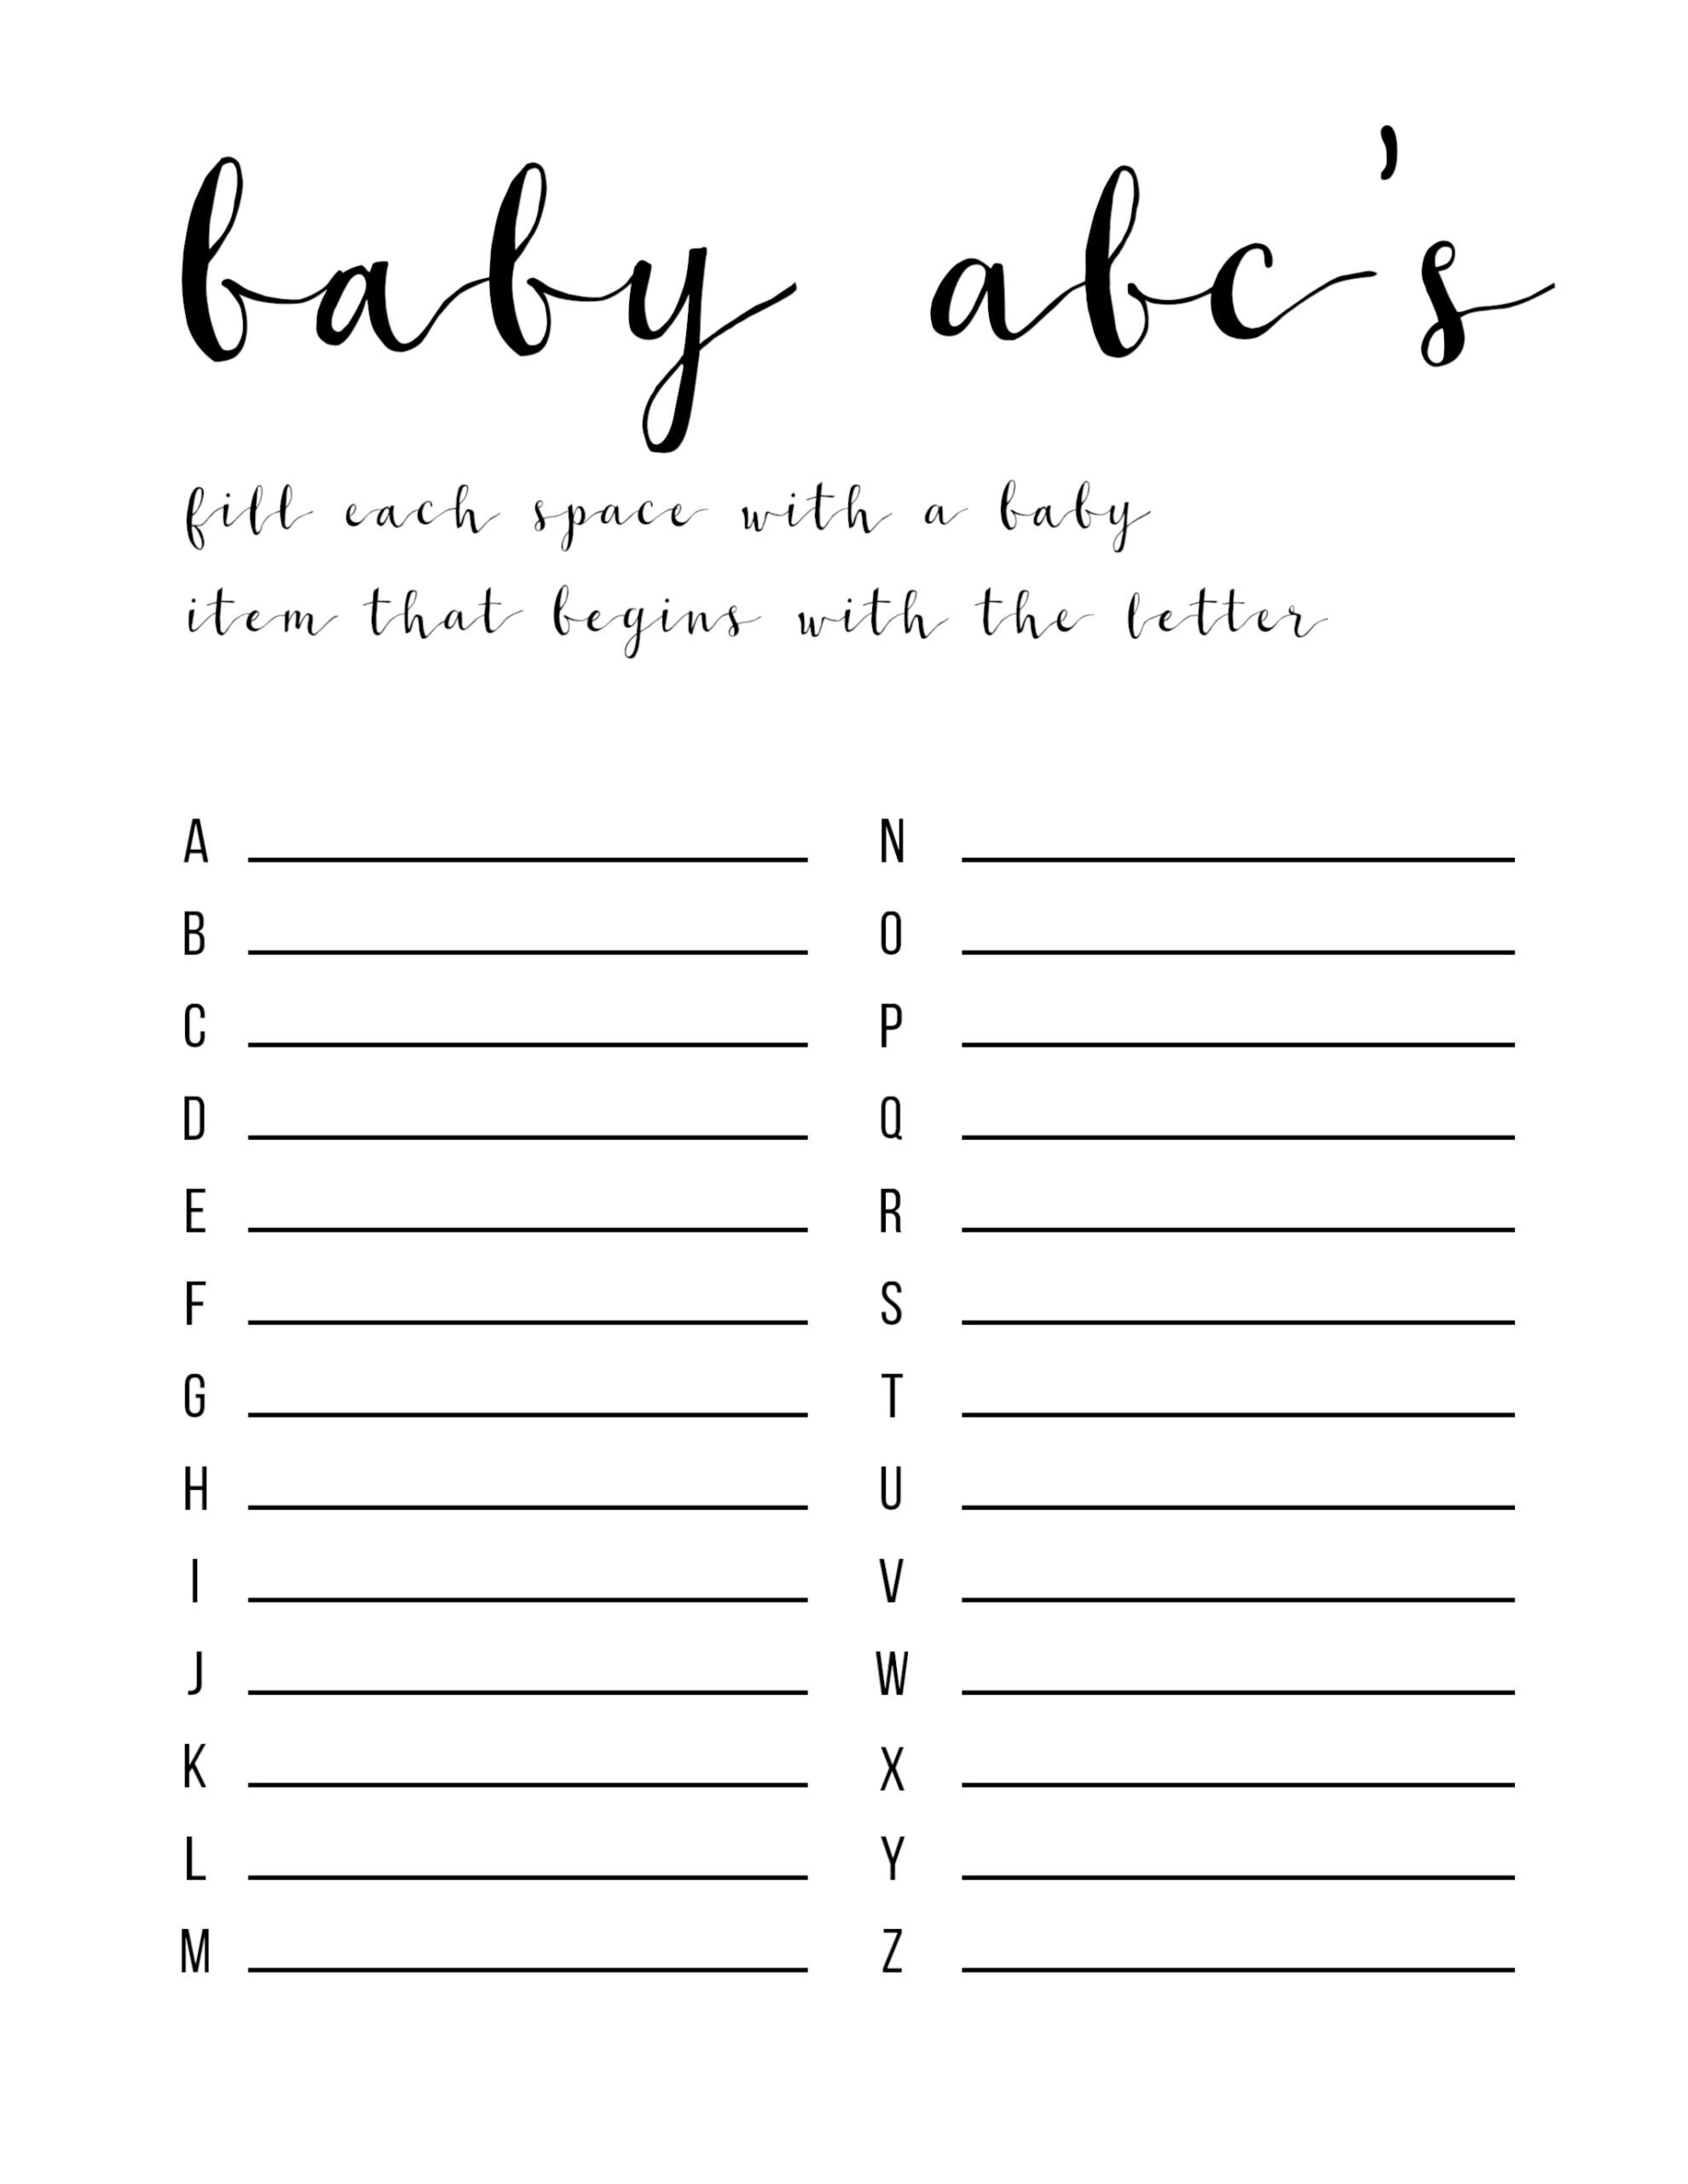 Baby Shower Games Ideas {Abc Game Free Printable} - Paper Trail Design - Free Baby Shower Games Printable Worksheets